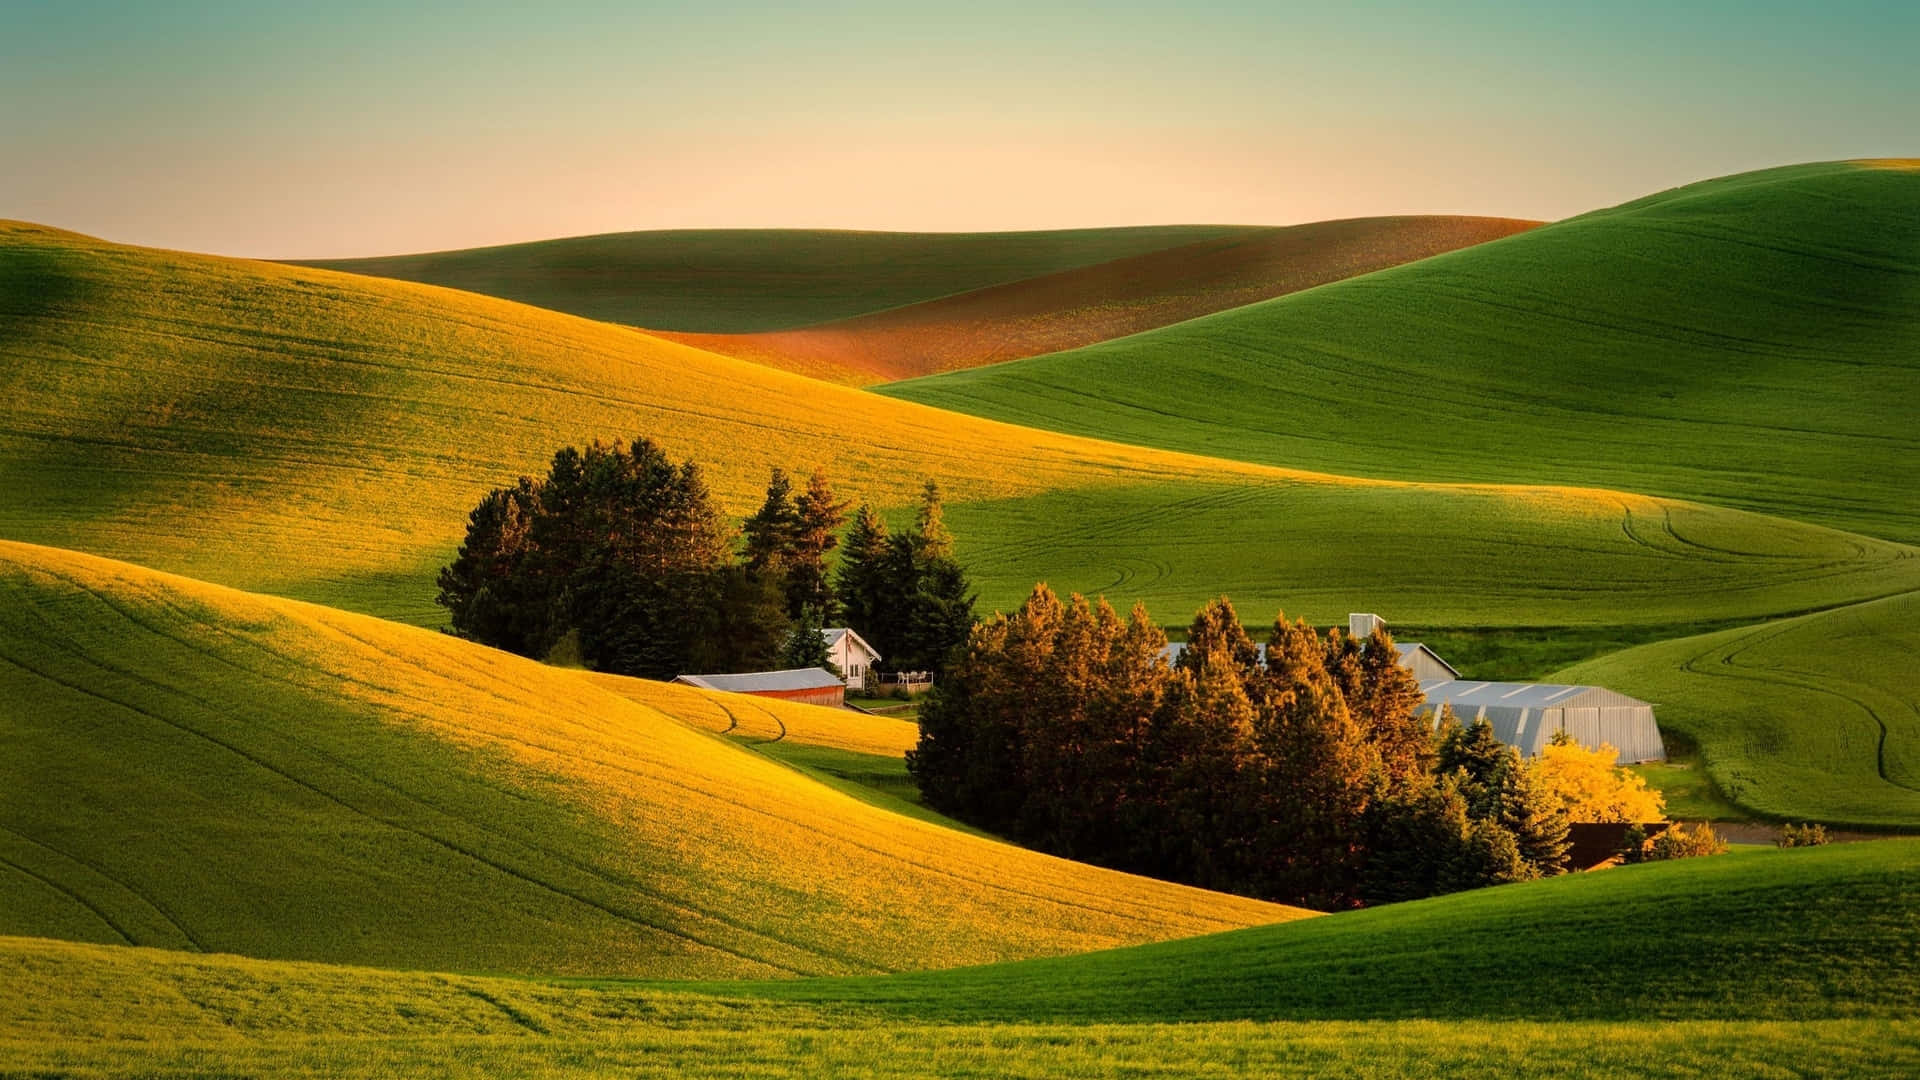 "Discover the Beauty of Country Living" Wallpaper